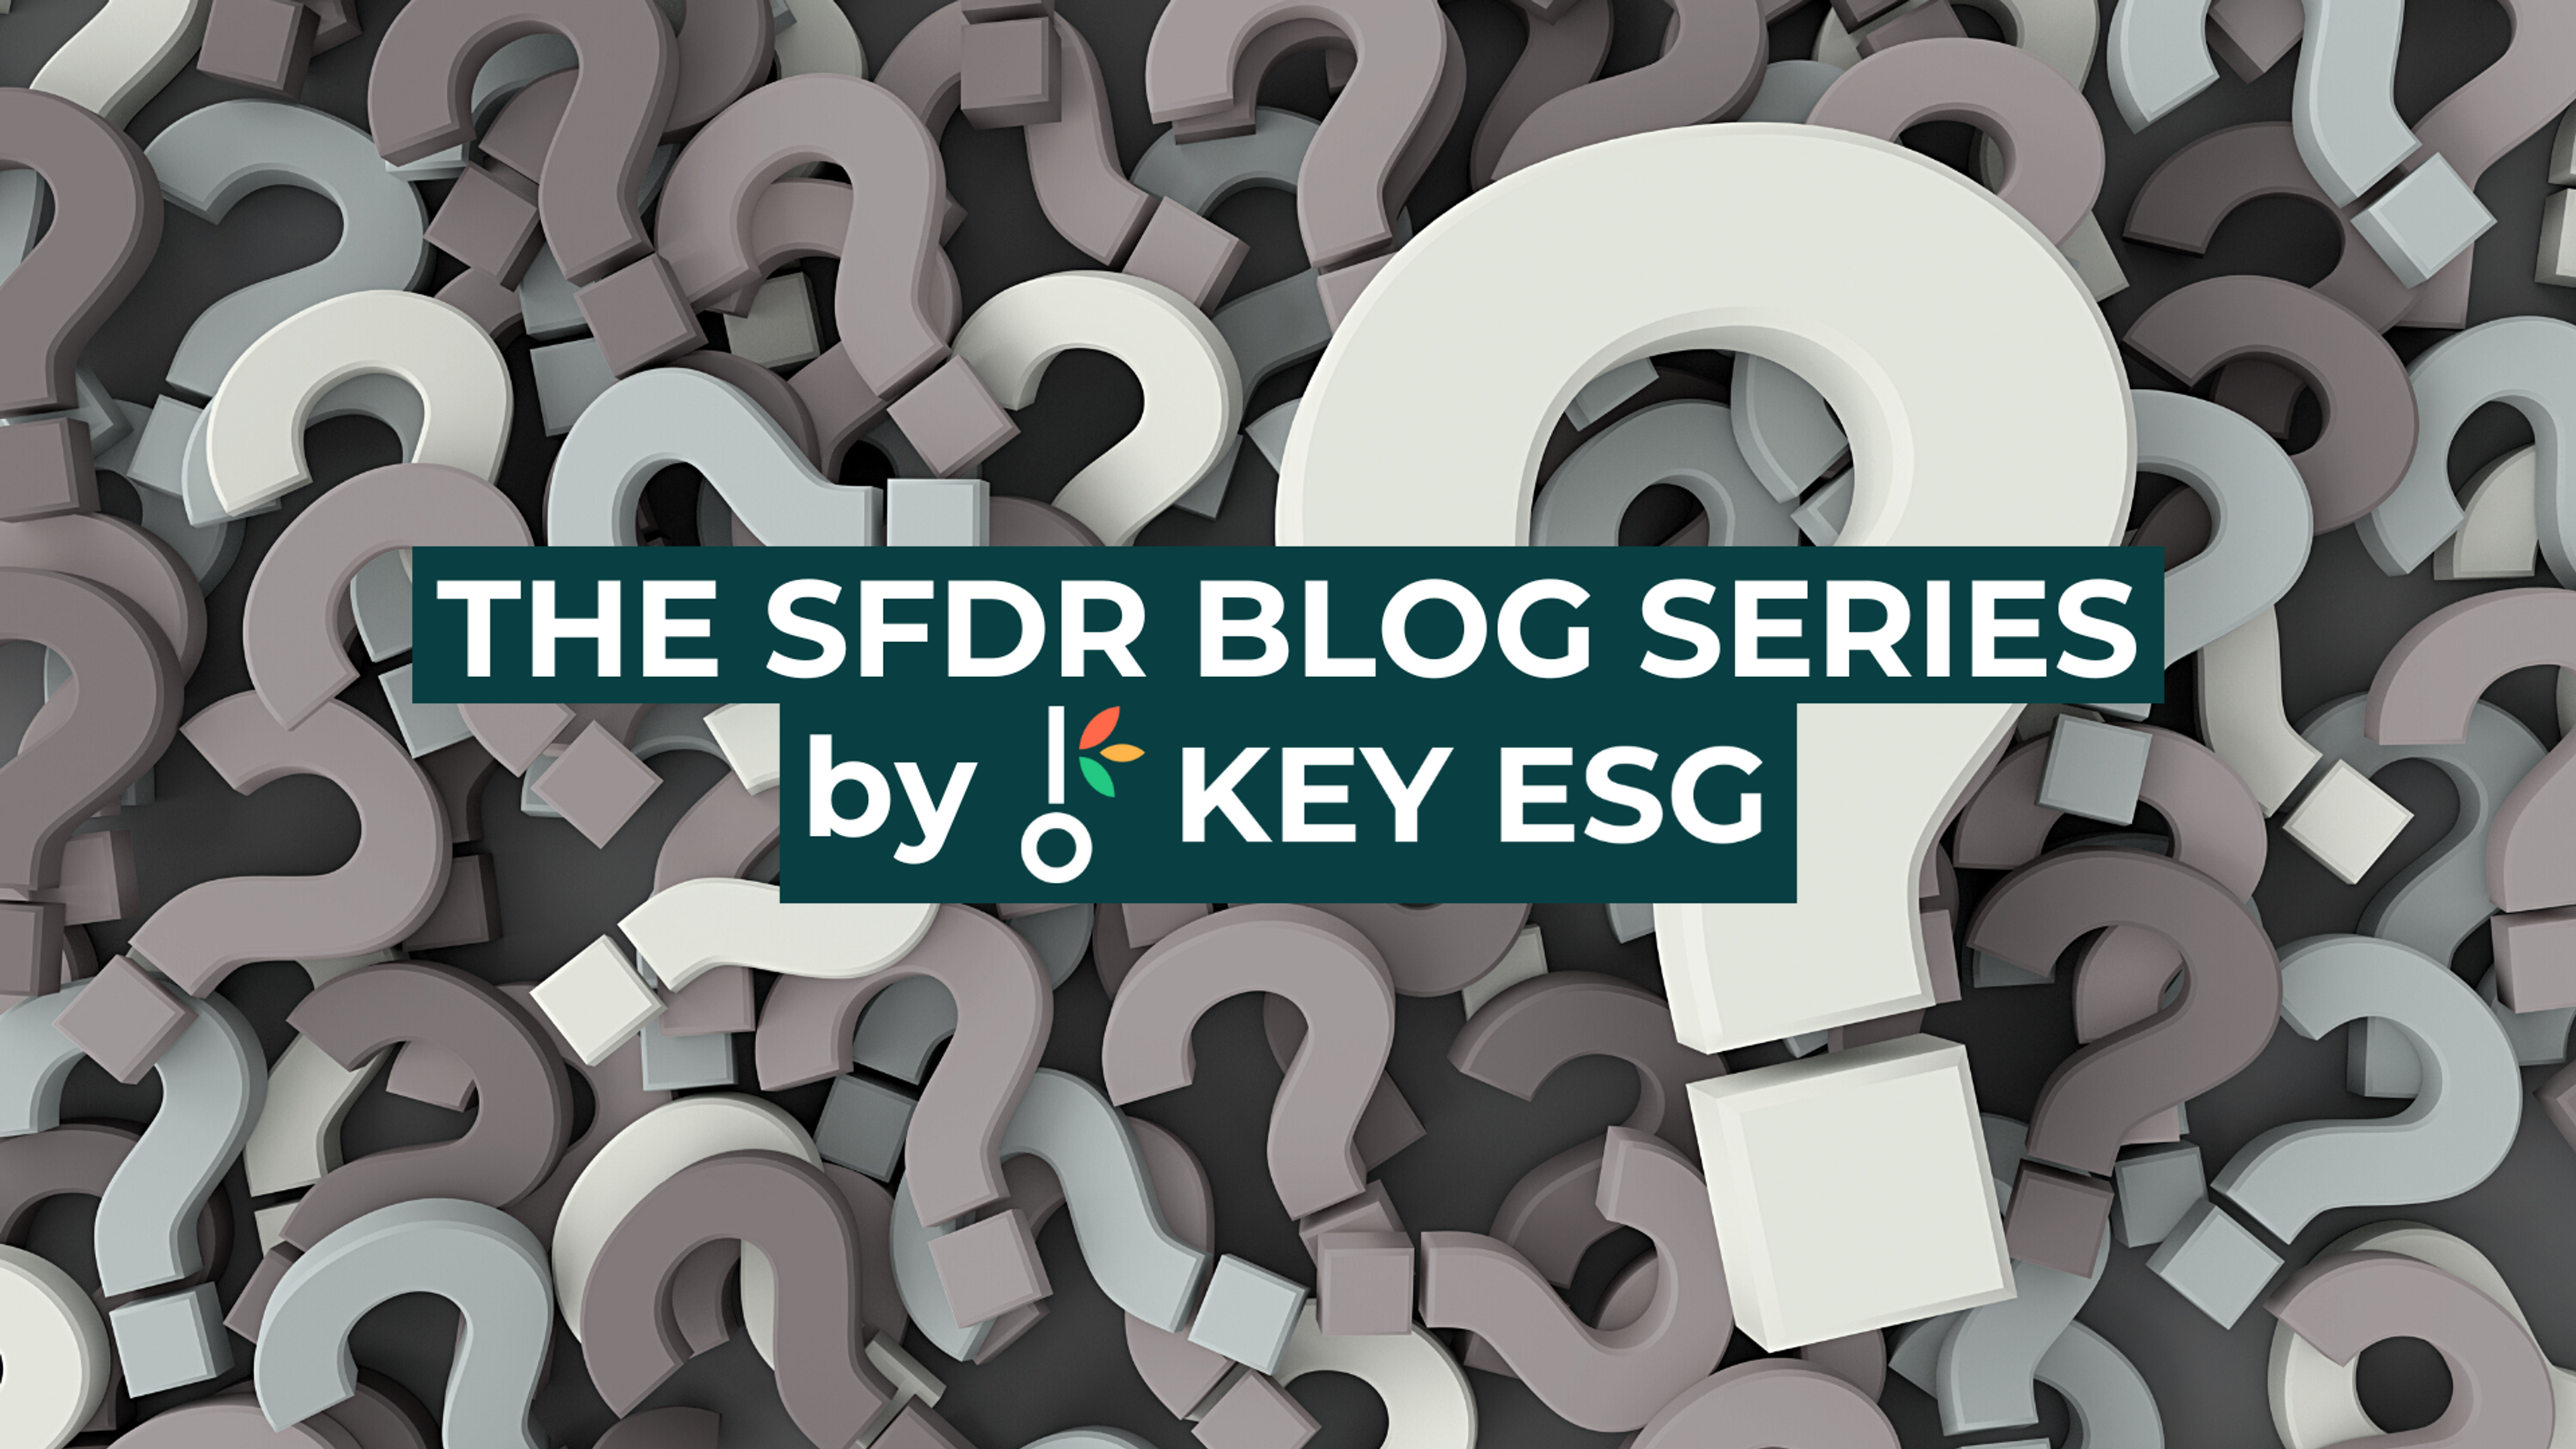 Cover image showing SFDR FAQs and questions